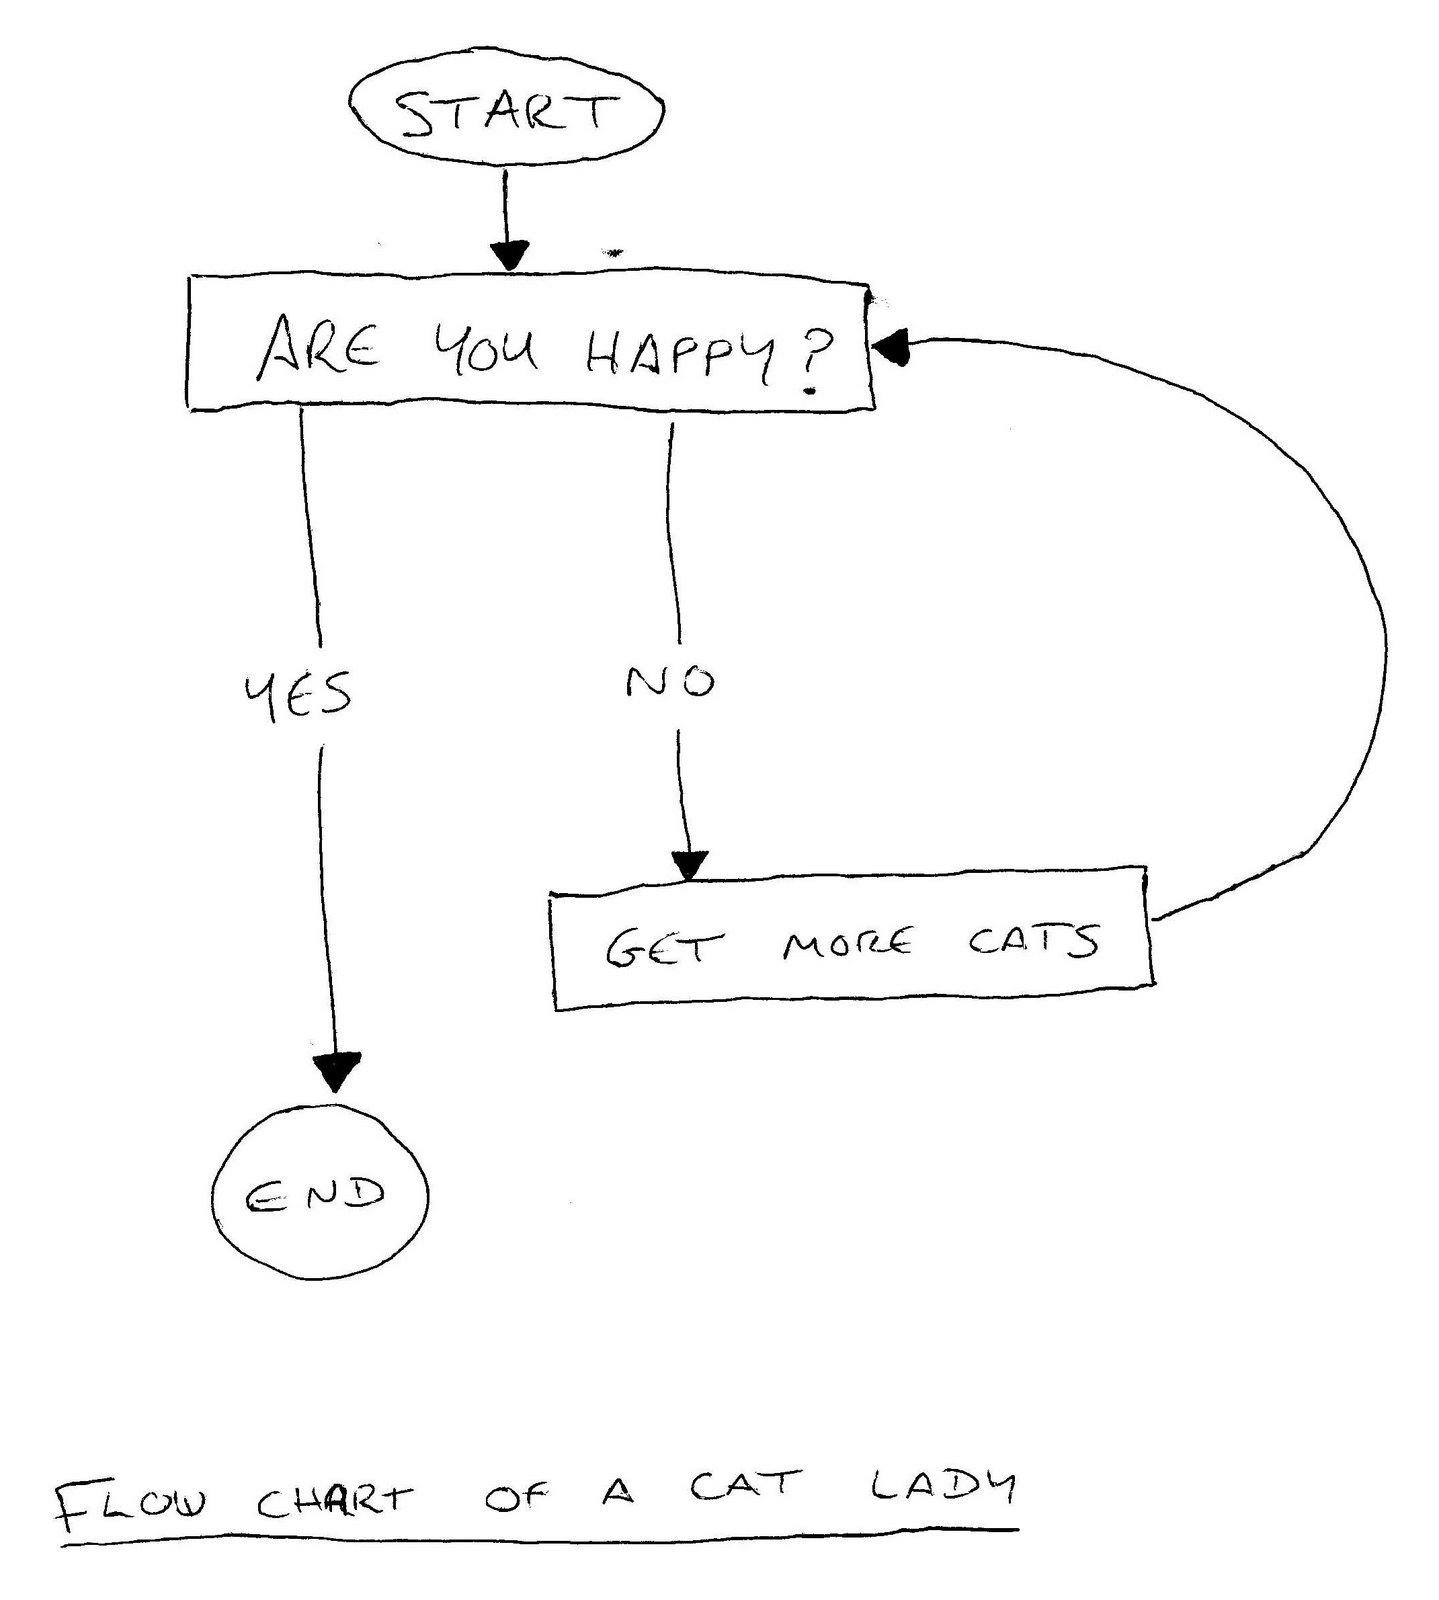 Flow chart of a cat lady.